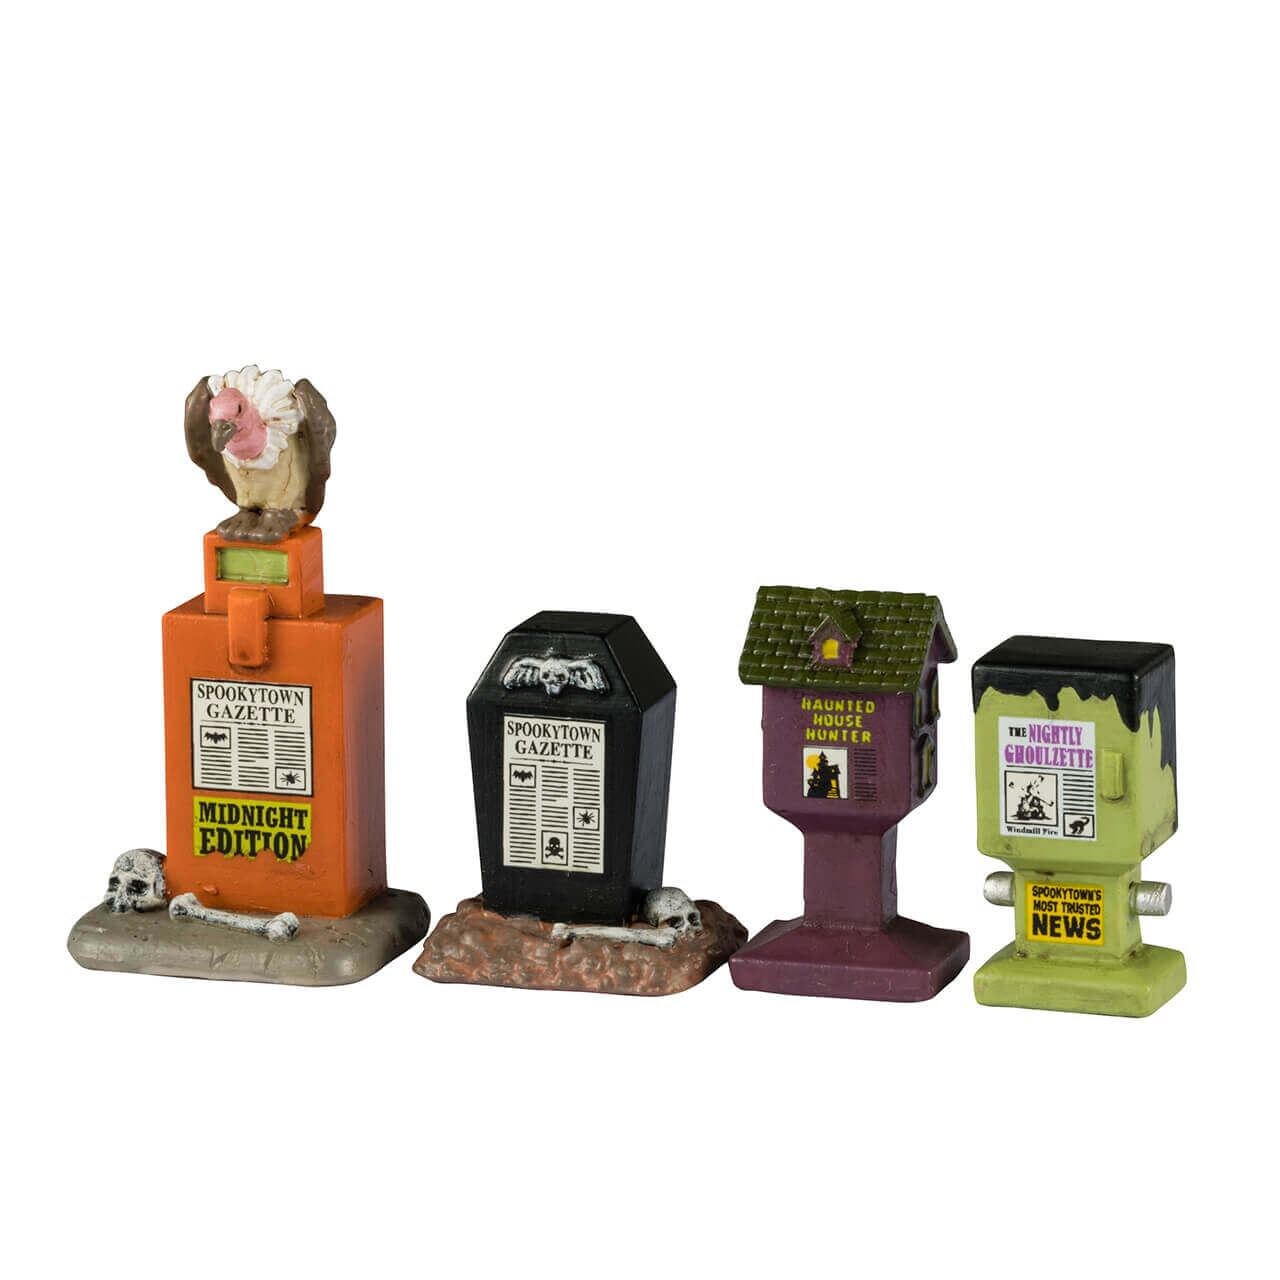 Lemax Spooky Town Halloween Village Accessory Spookytown Gazette Newspaper Stands Set of 4